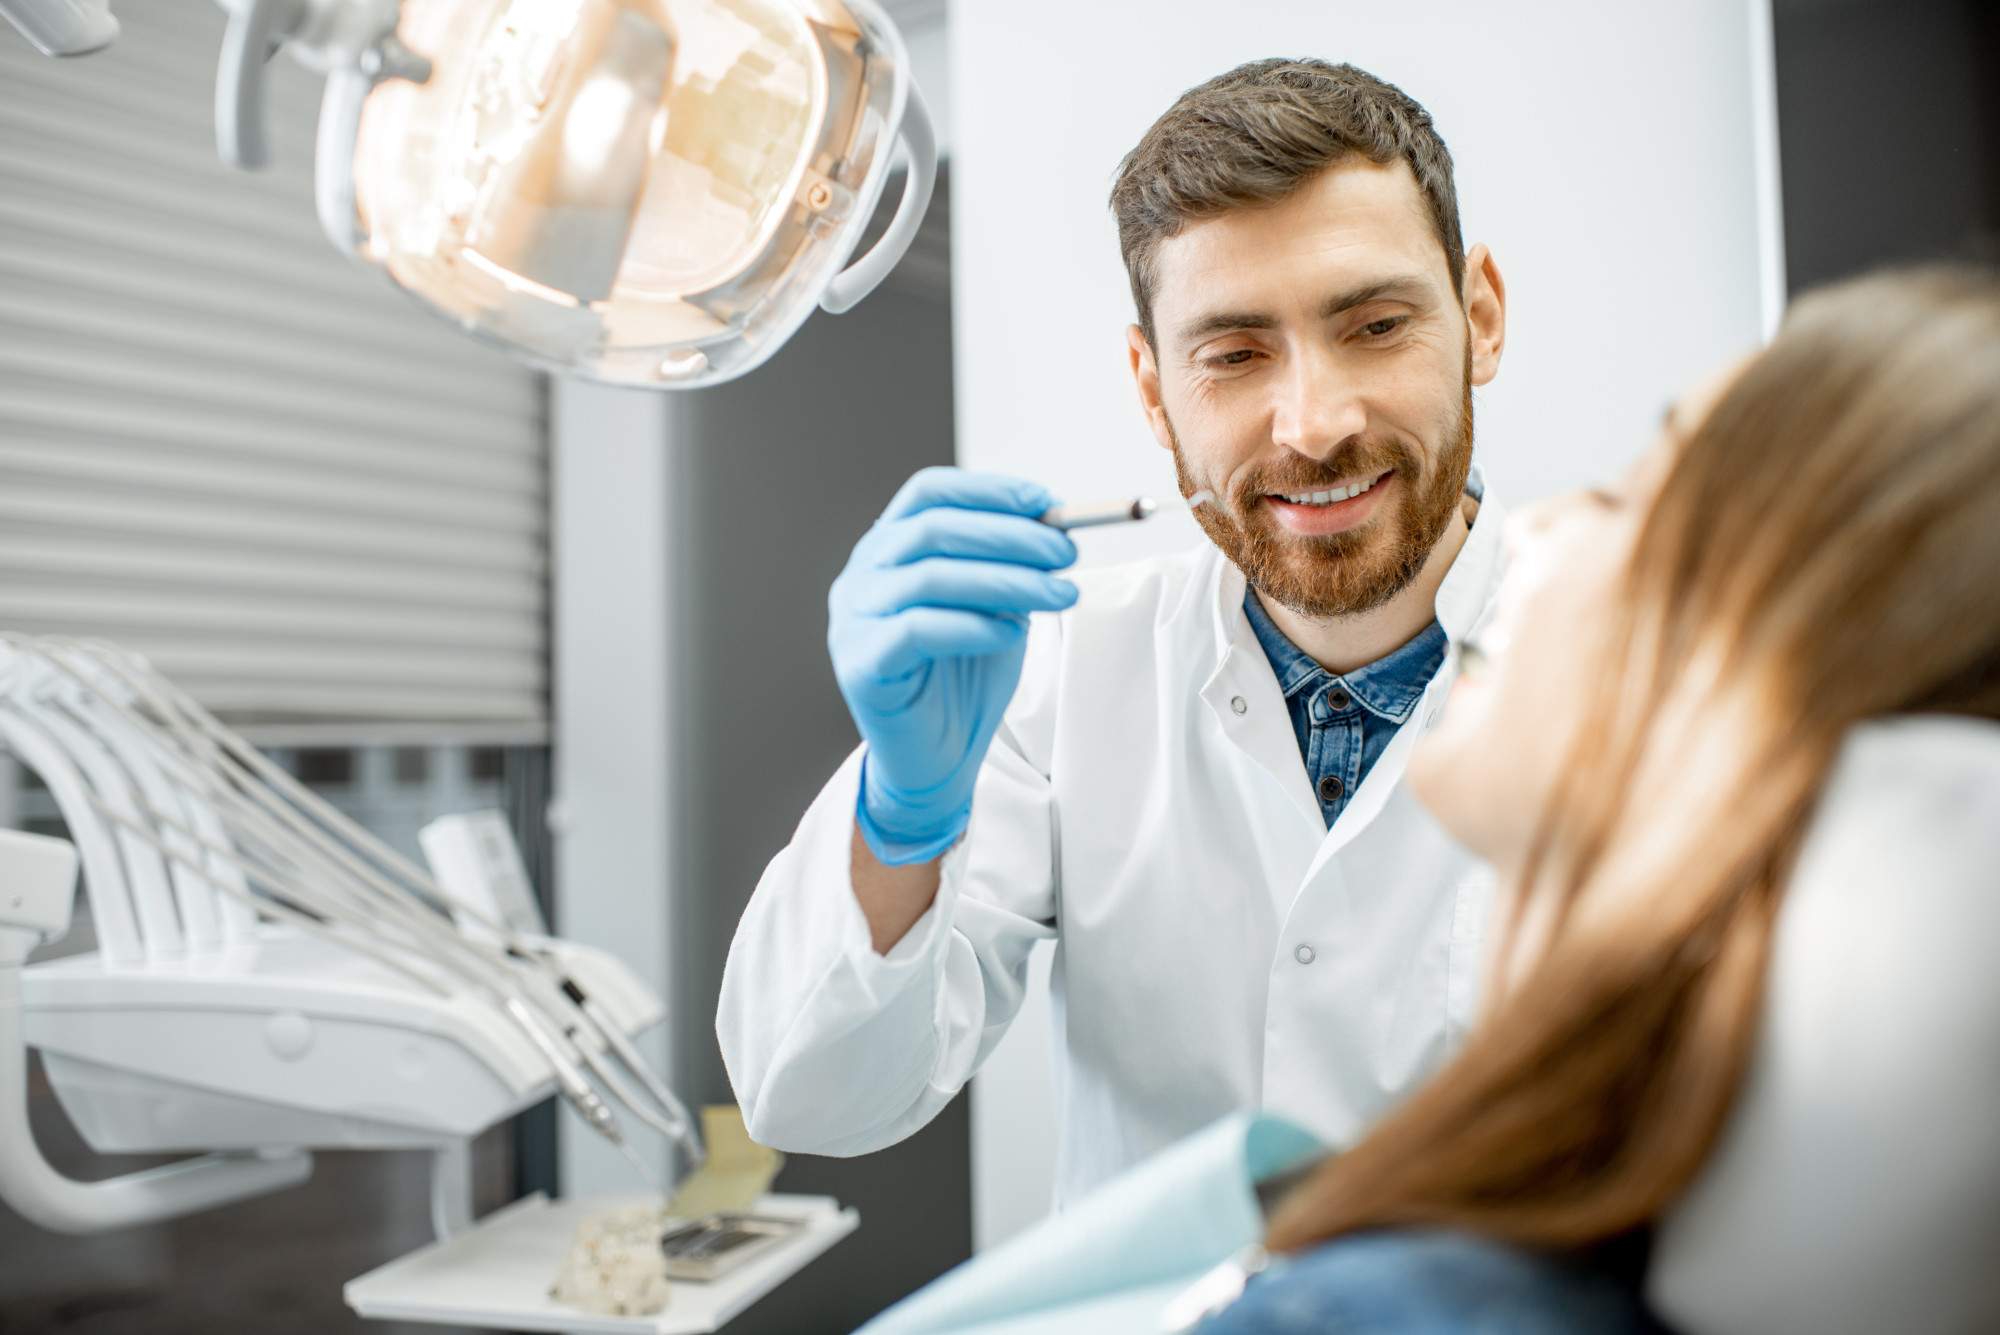 Periodontist vs Orthodontist: What Are the Differences?